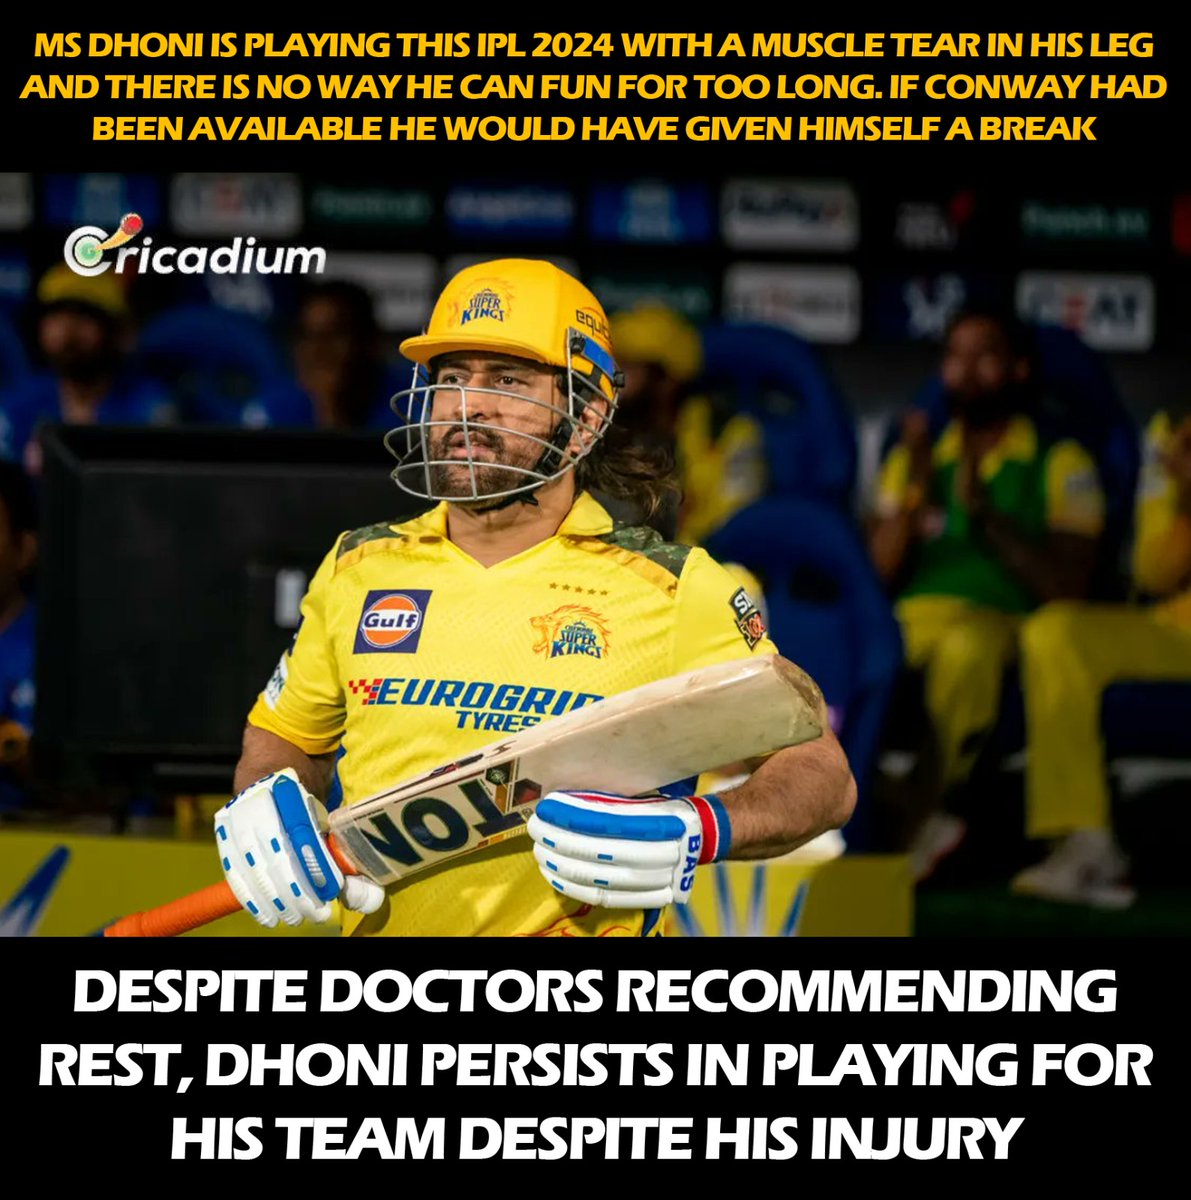 A salute to MS Dhoni! His unwavering commitment, even solely for the fans, is truly remarkable. 🙌🏏 

#DhoniForever #FanFavorite #IPL24 #CRICKET #CSK #MSDHONI